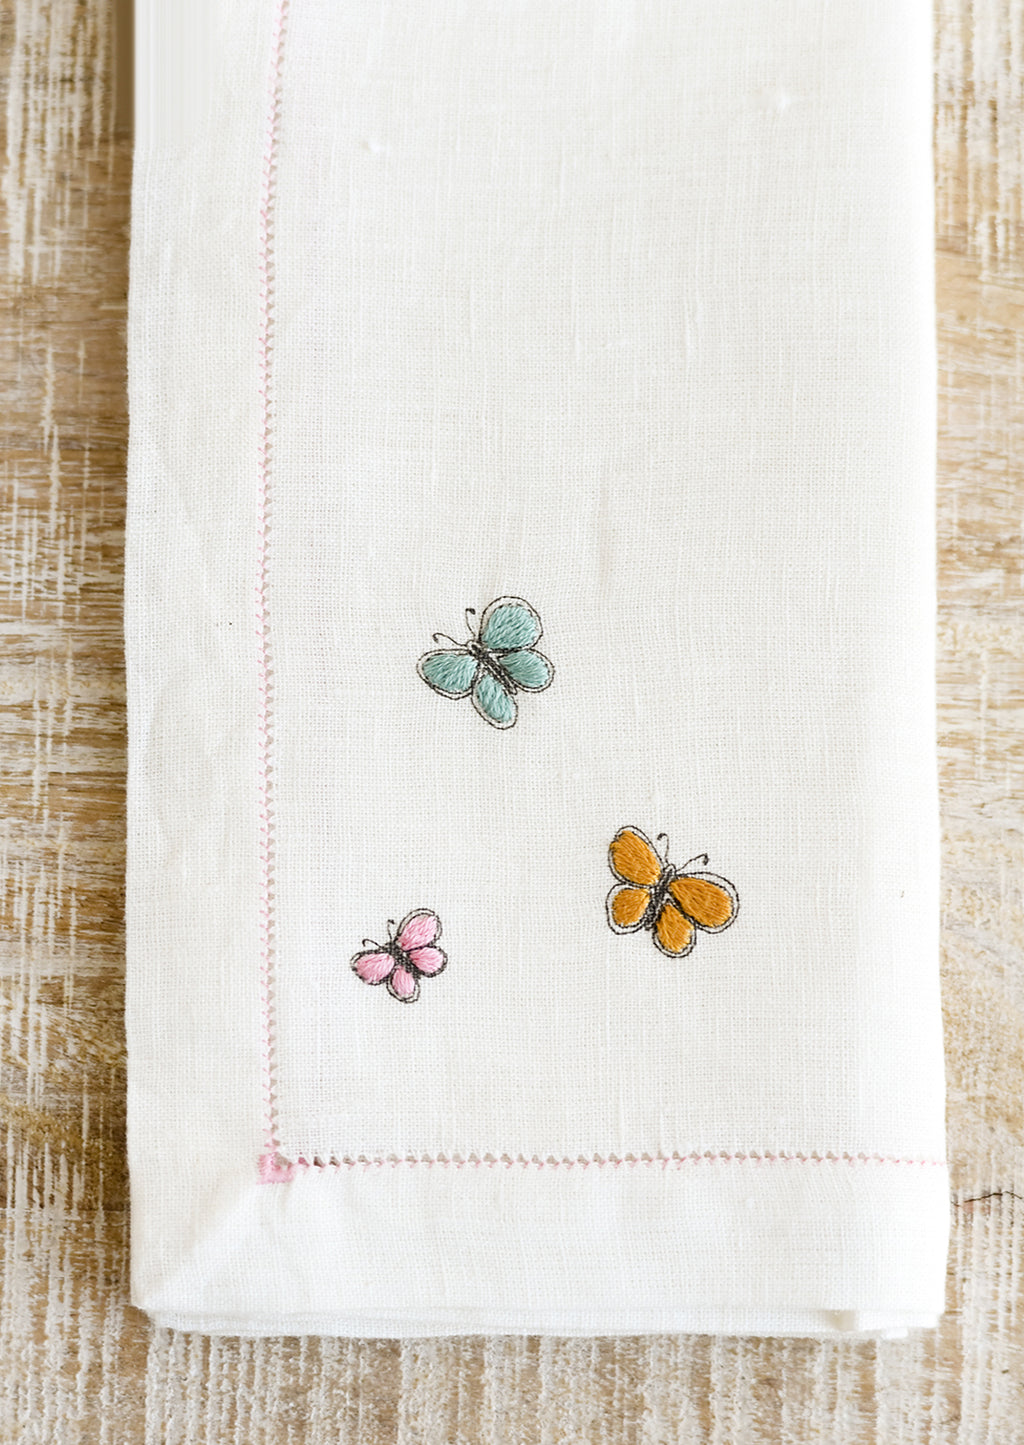 3: Butterfly embroidery detailing on a white linen napkin.